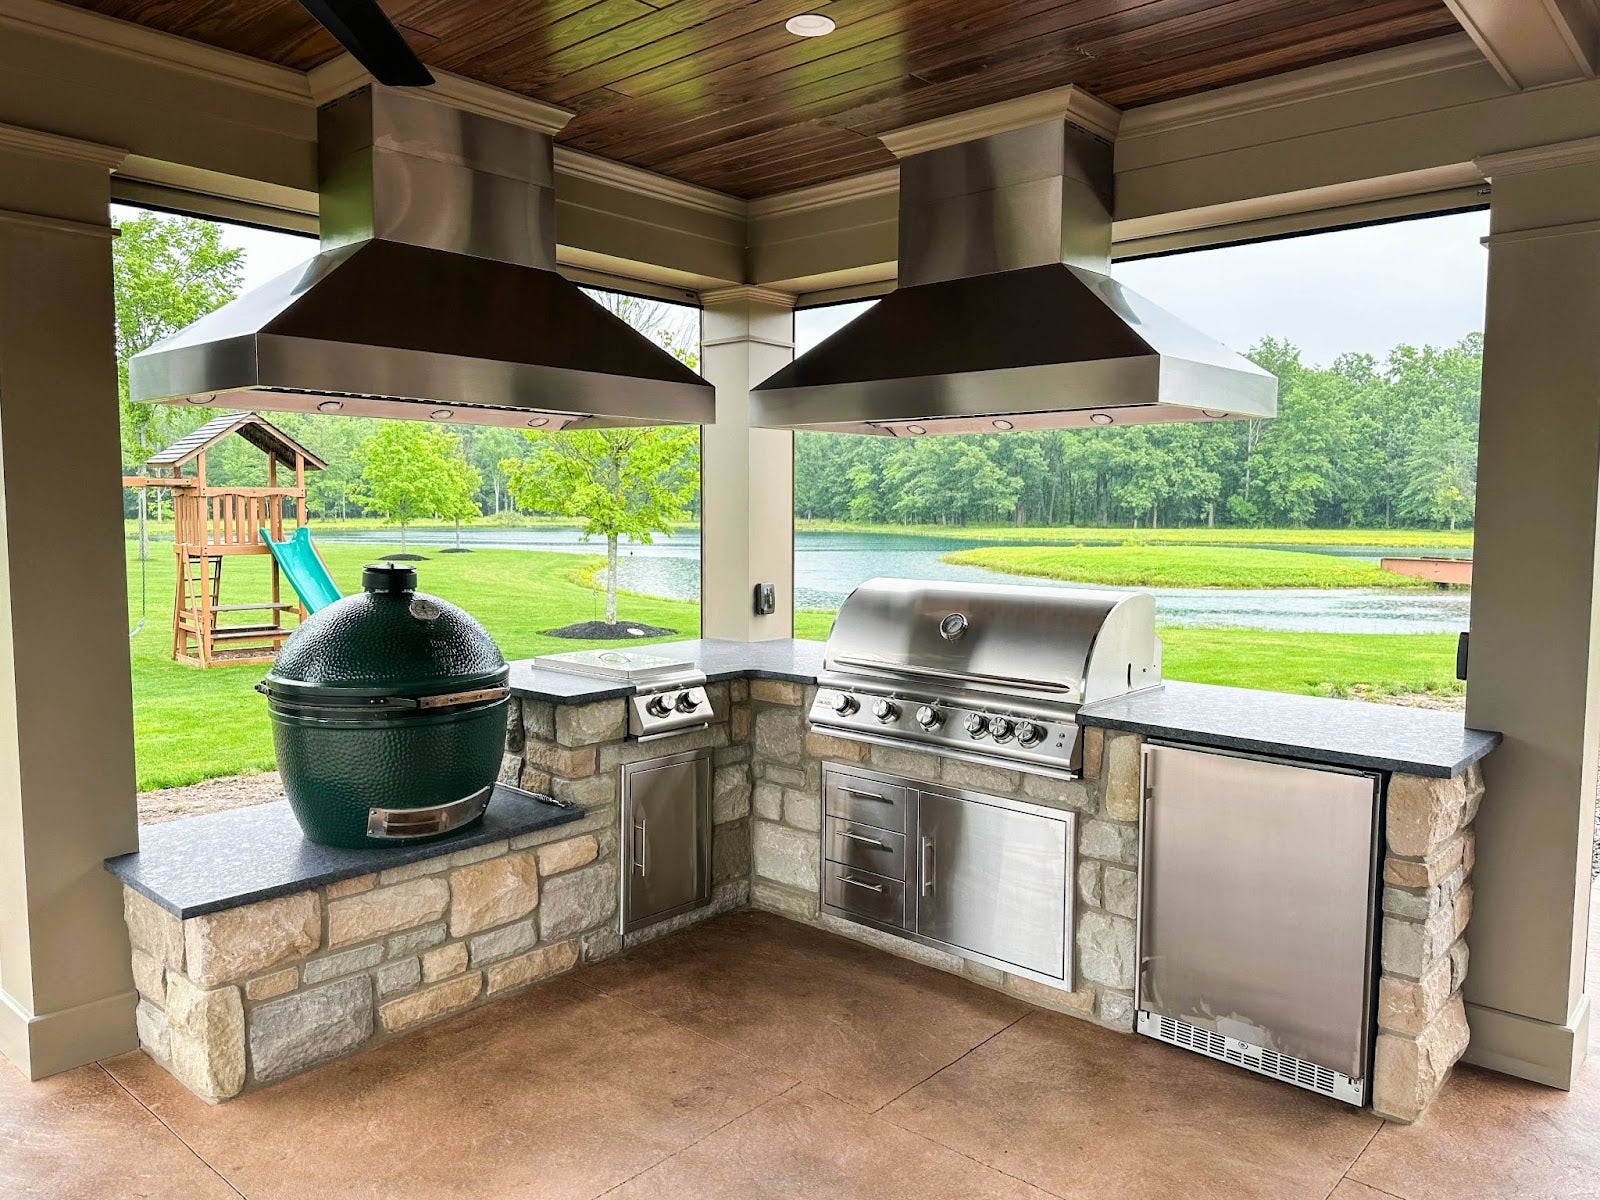 Spacious outdoor kitchen with premium stainless steel grill, smoker, and appliances set against a stone countertop with a view of a playground and pond in the background.